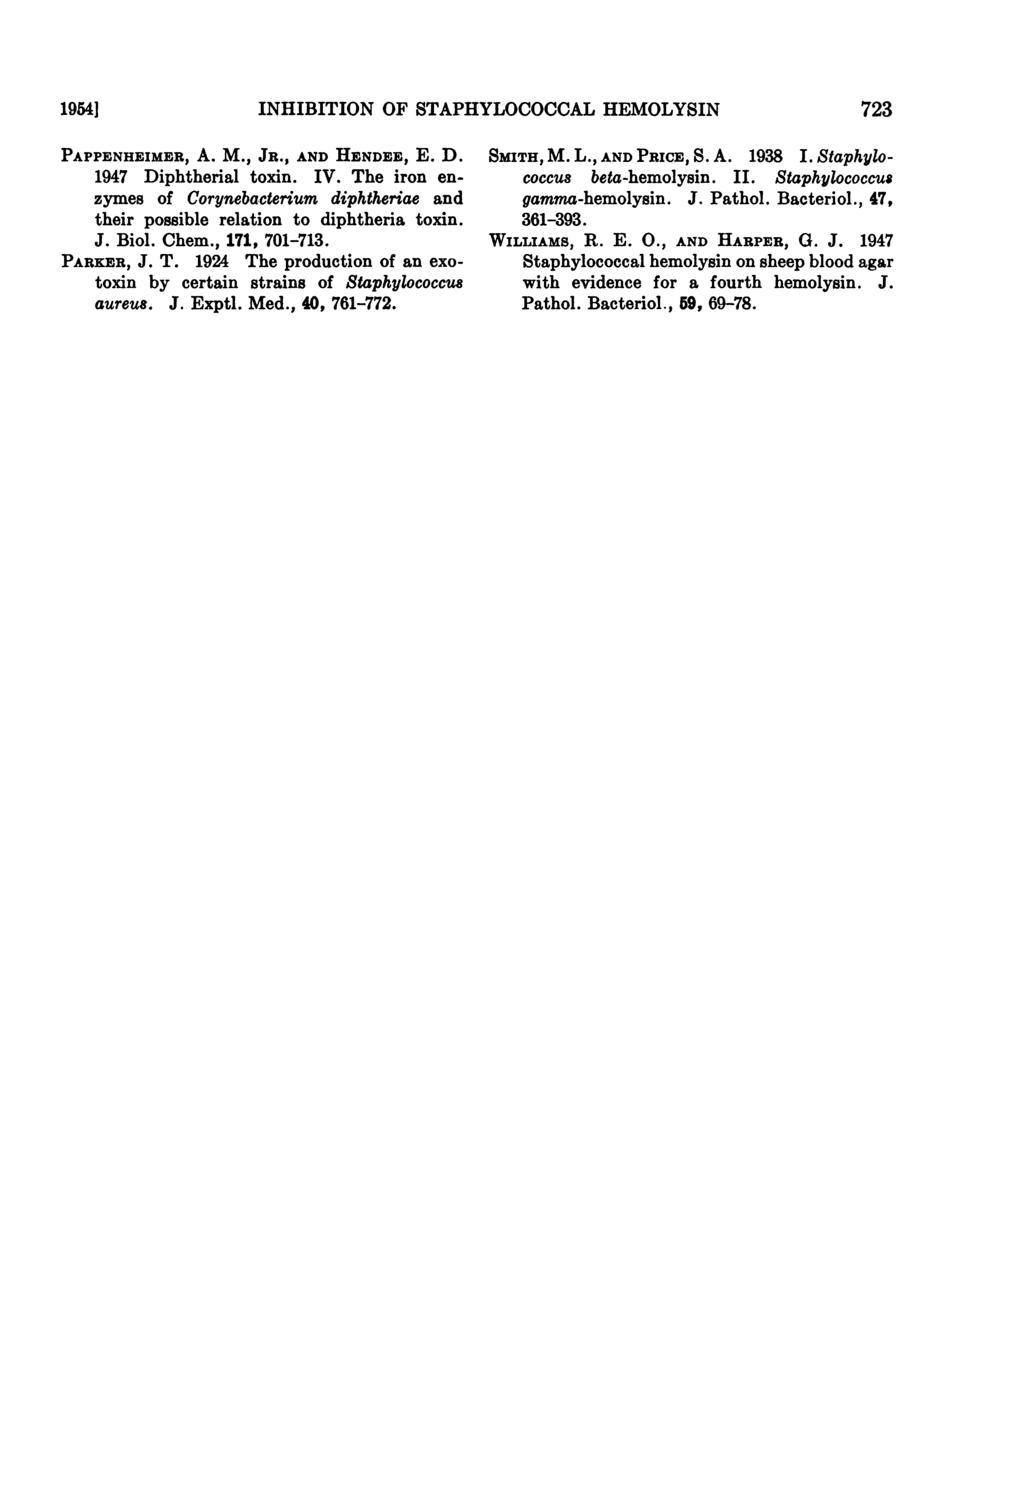 1954] INHIBITION OF STAPHYLOCOCCAL HEMOLYSIN 723 PAPPENHEIMER, A. M., JR., AND HENDEE, E. D. 1947 Diphtherial toxin. IV.